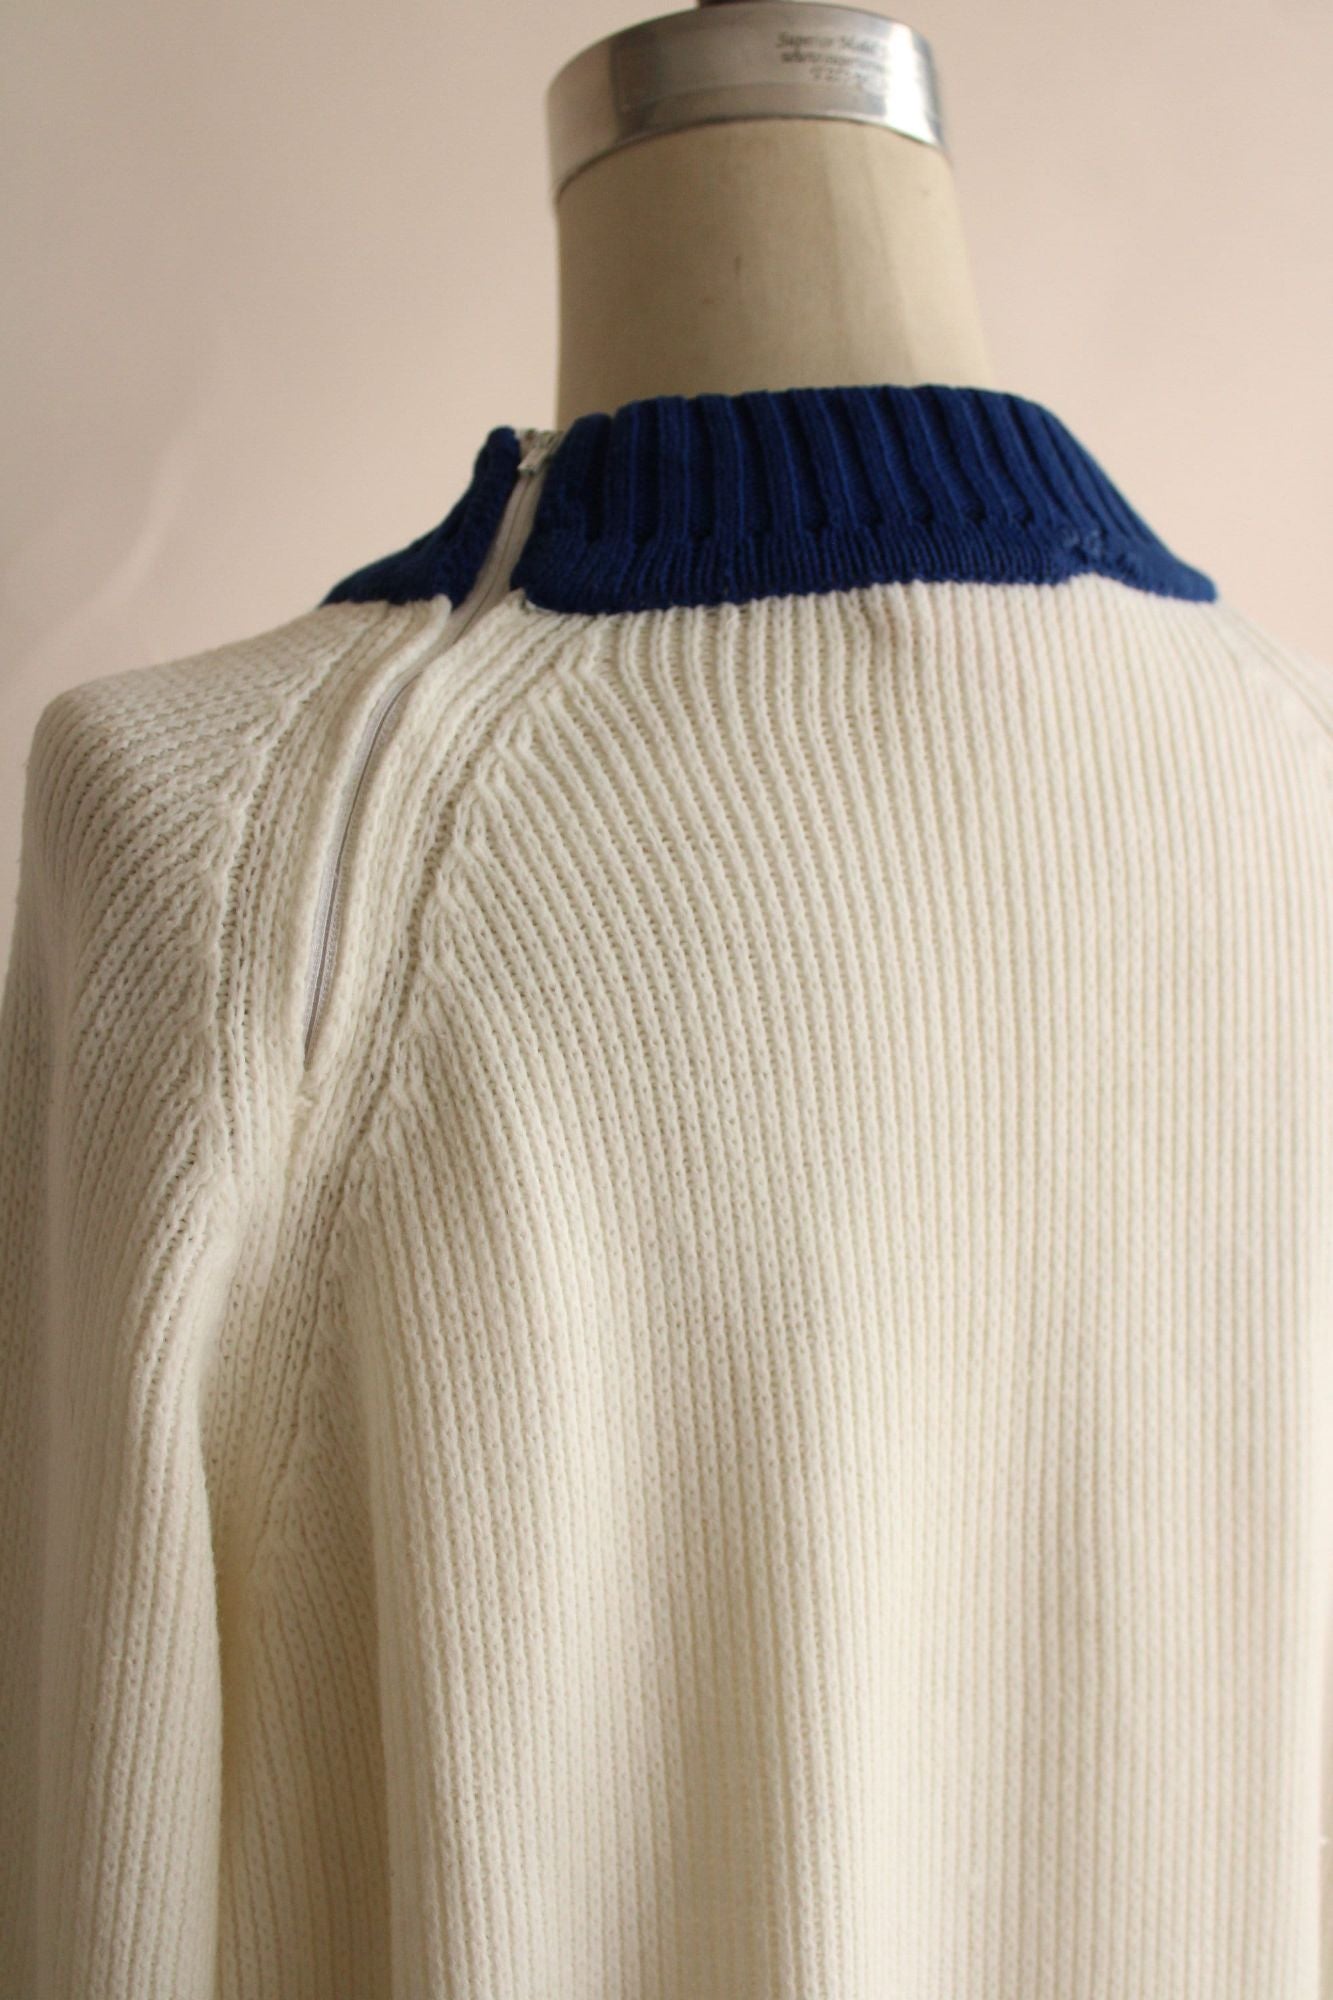 Vintage 1970s The Campus Shop Nordic Style Blue and White Jumper